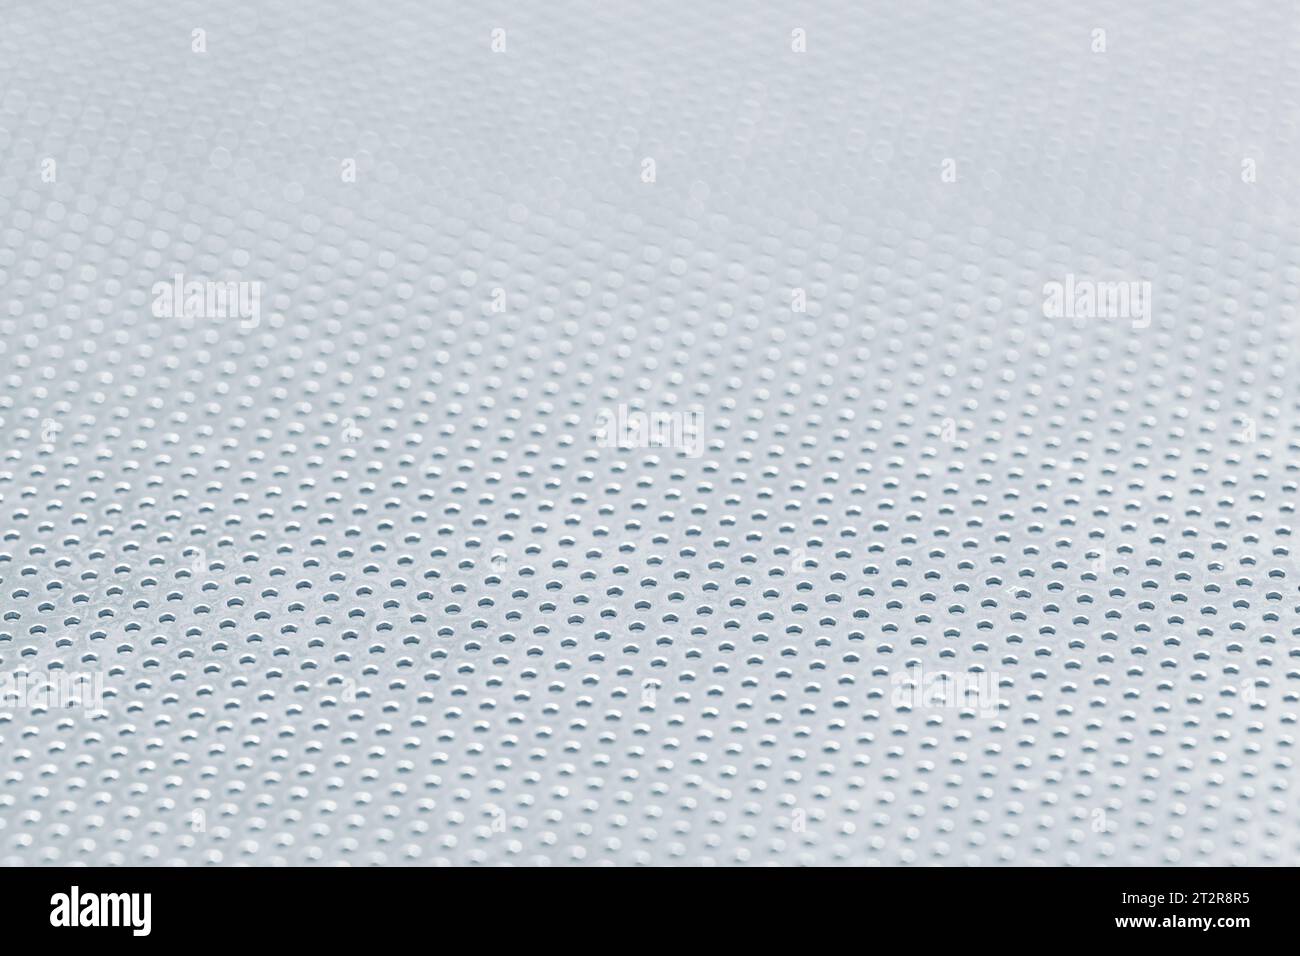 Abstract background of a stainless steel perforated sheet. Full frame Stock Photo